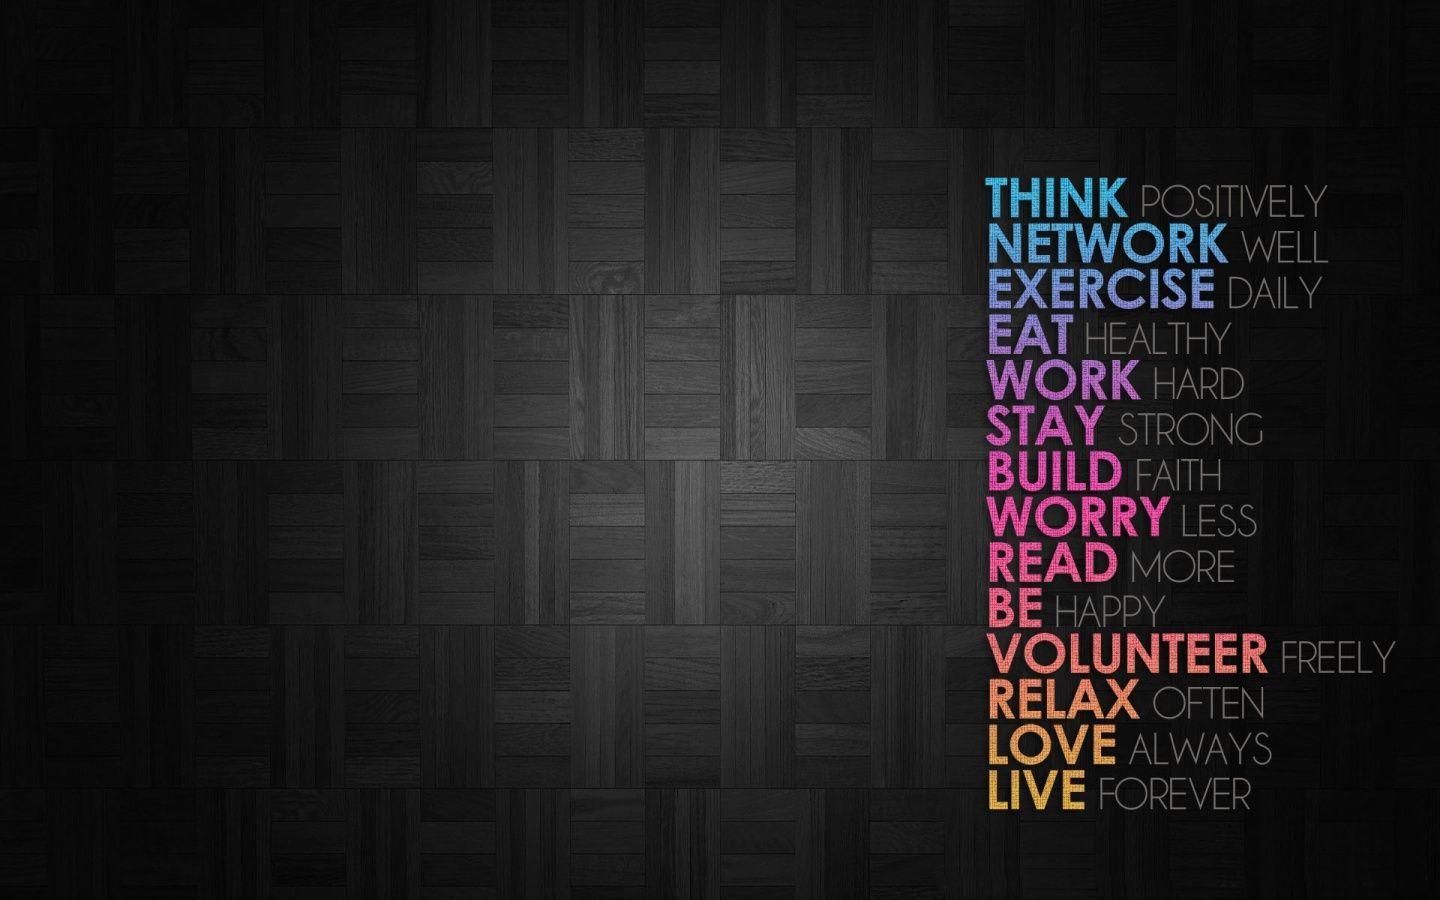 Wallpaper With Positive Quotes